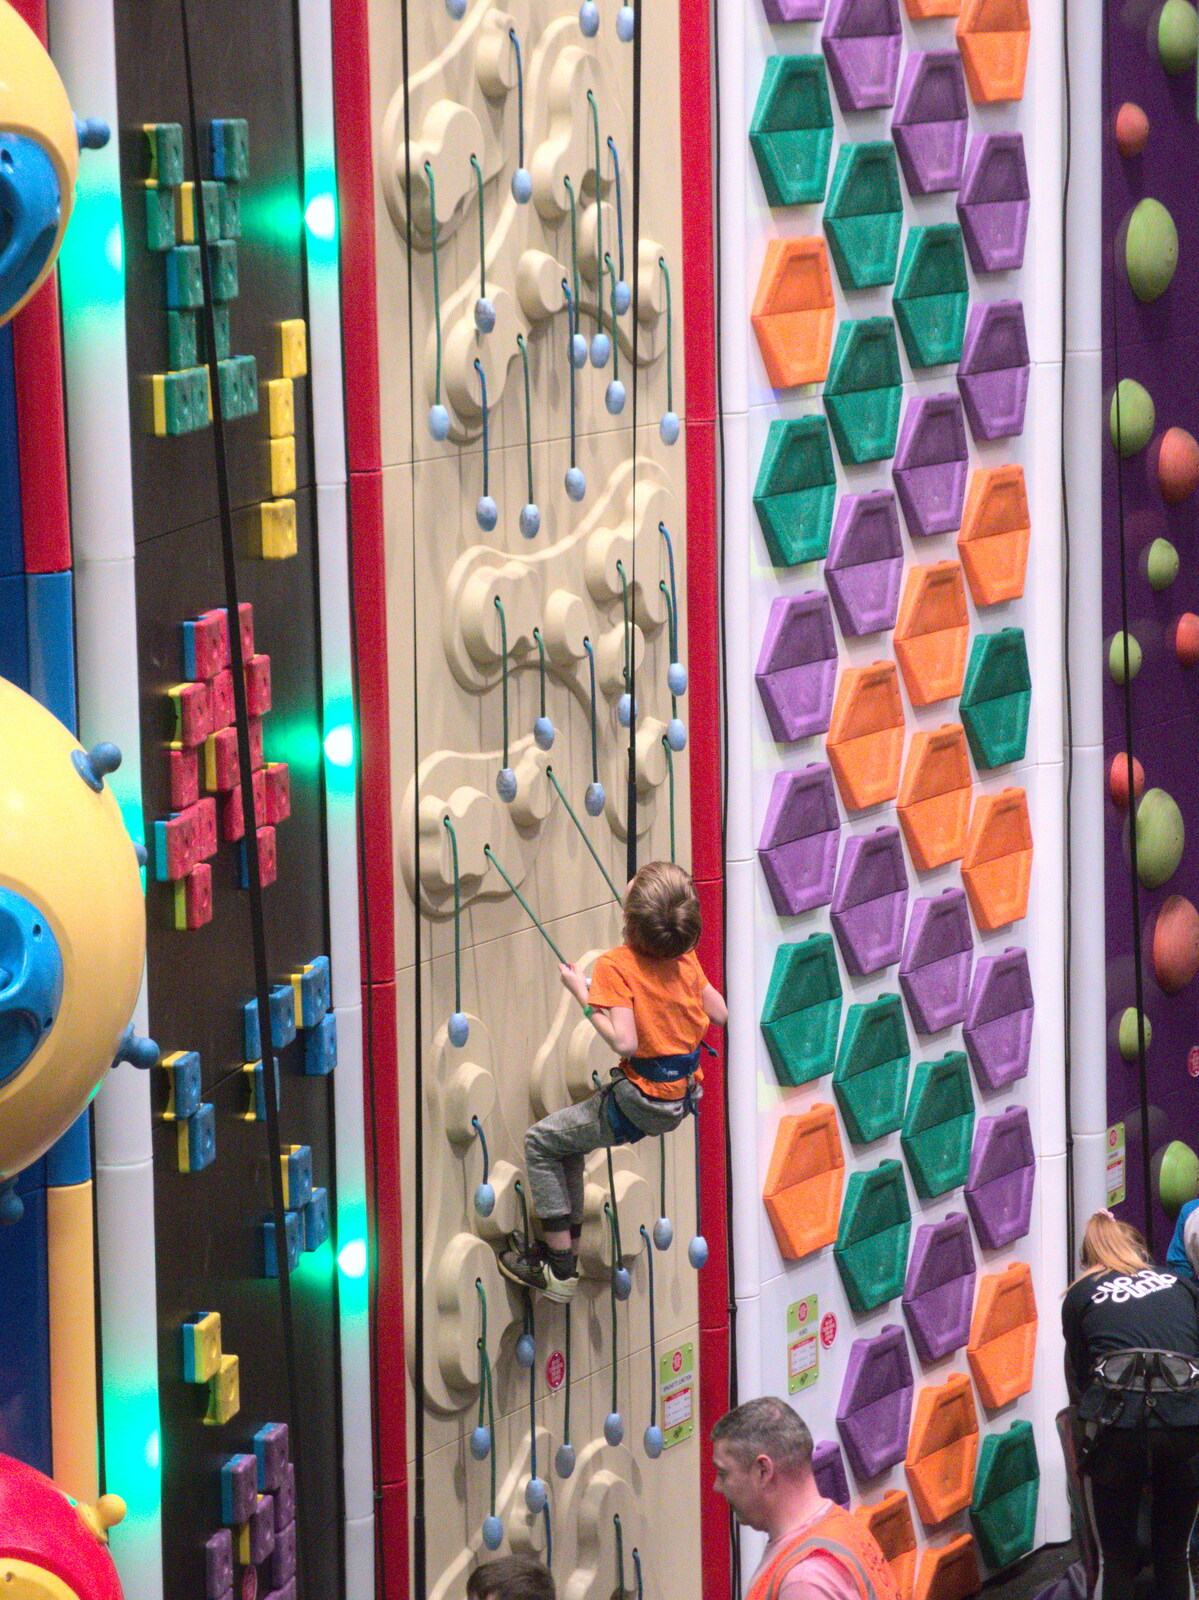 Harry gets to do some climbing from Clip and Climb, The Havens, Ipswich - 15th February 2020